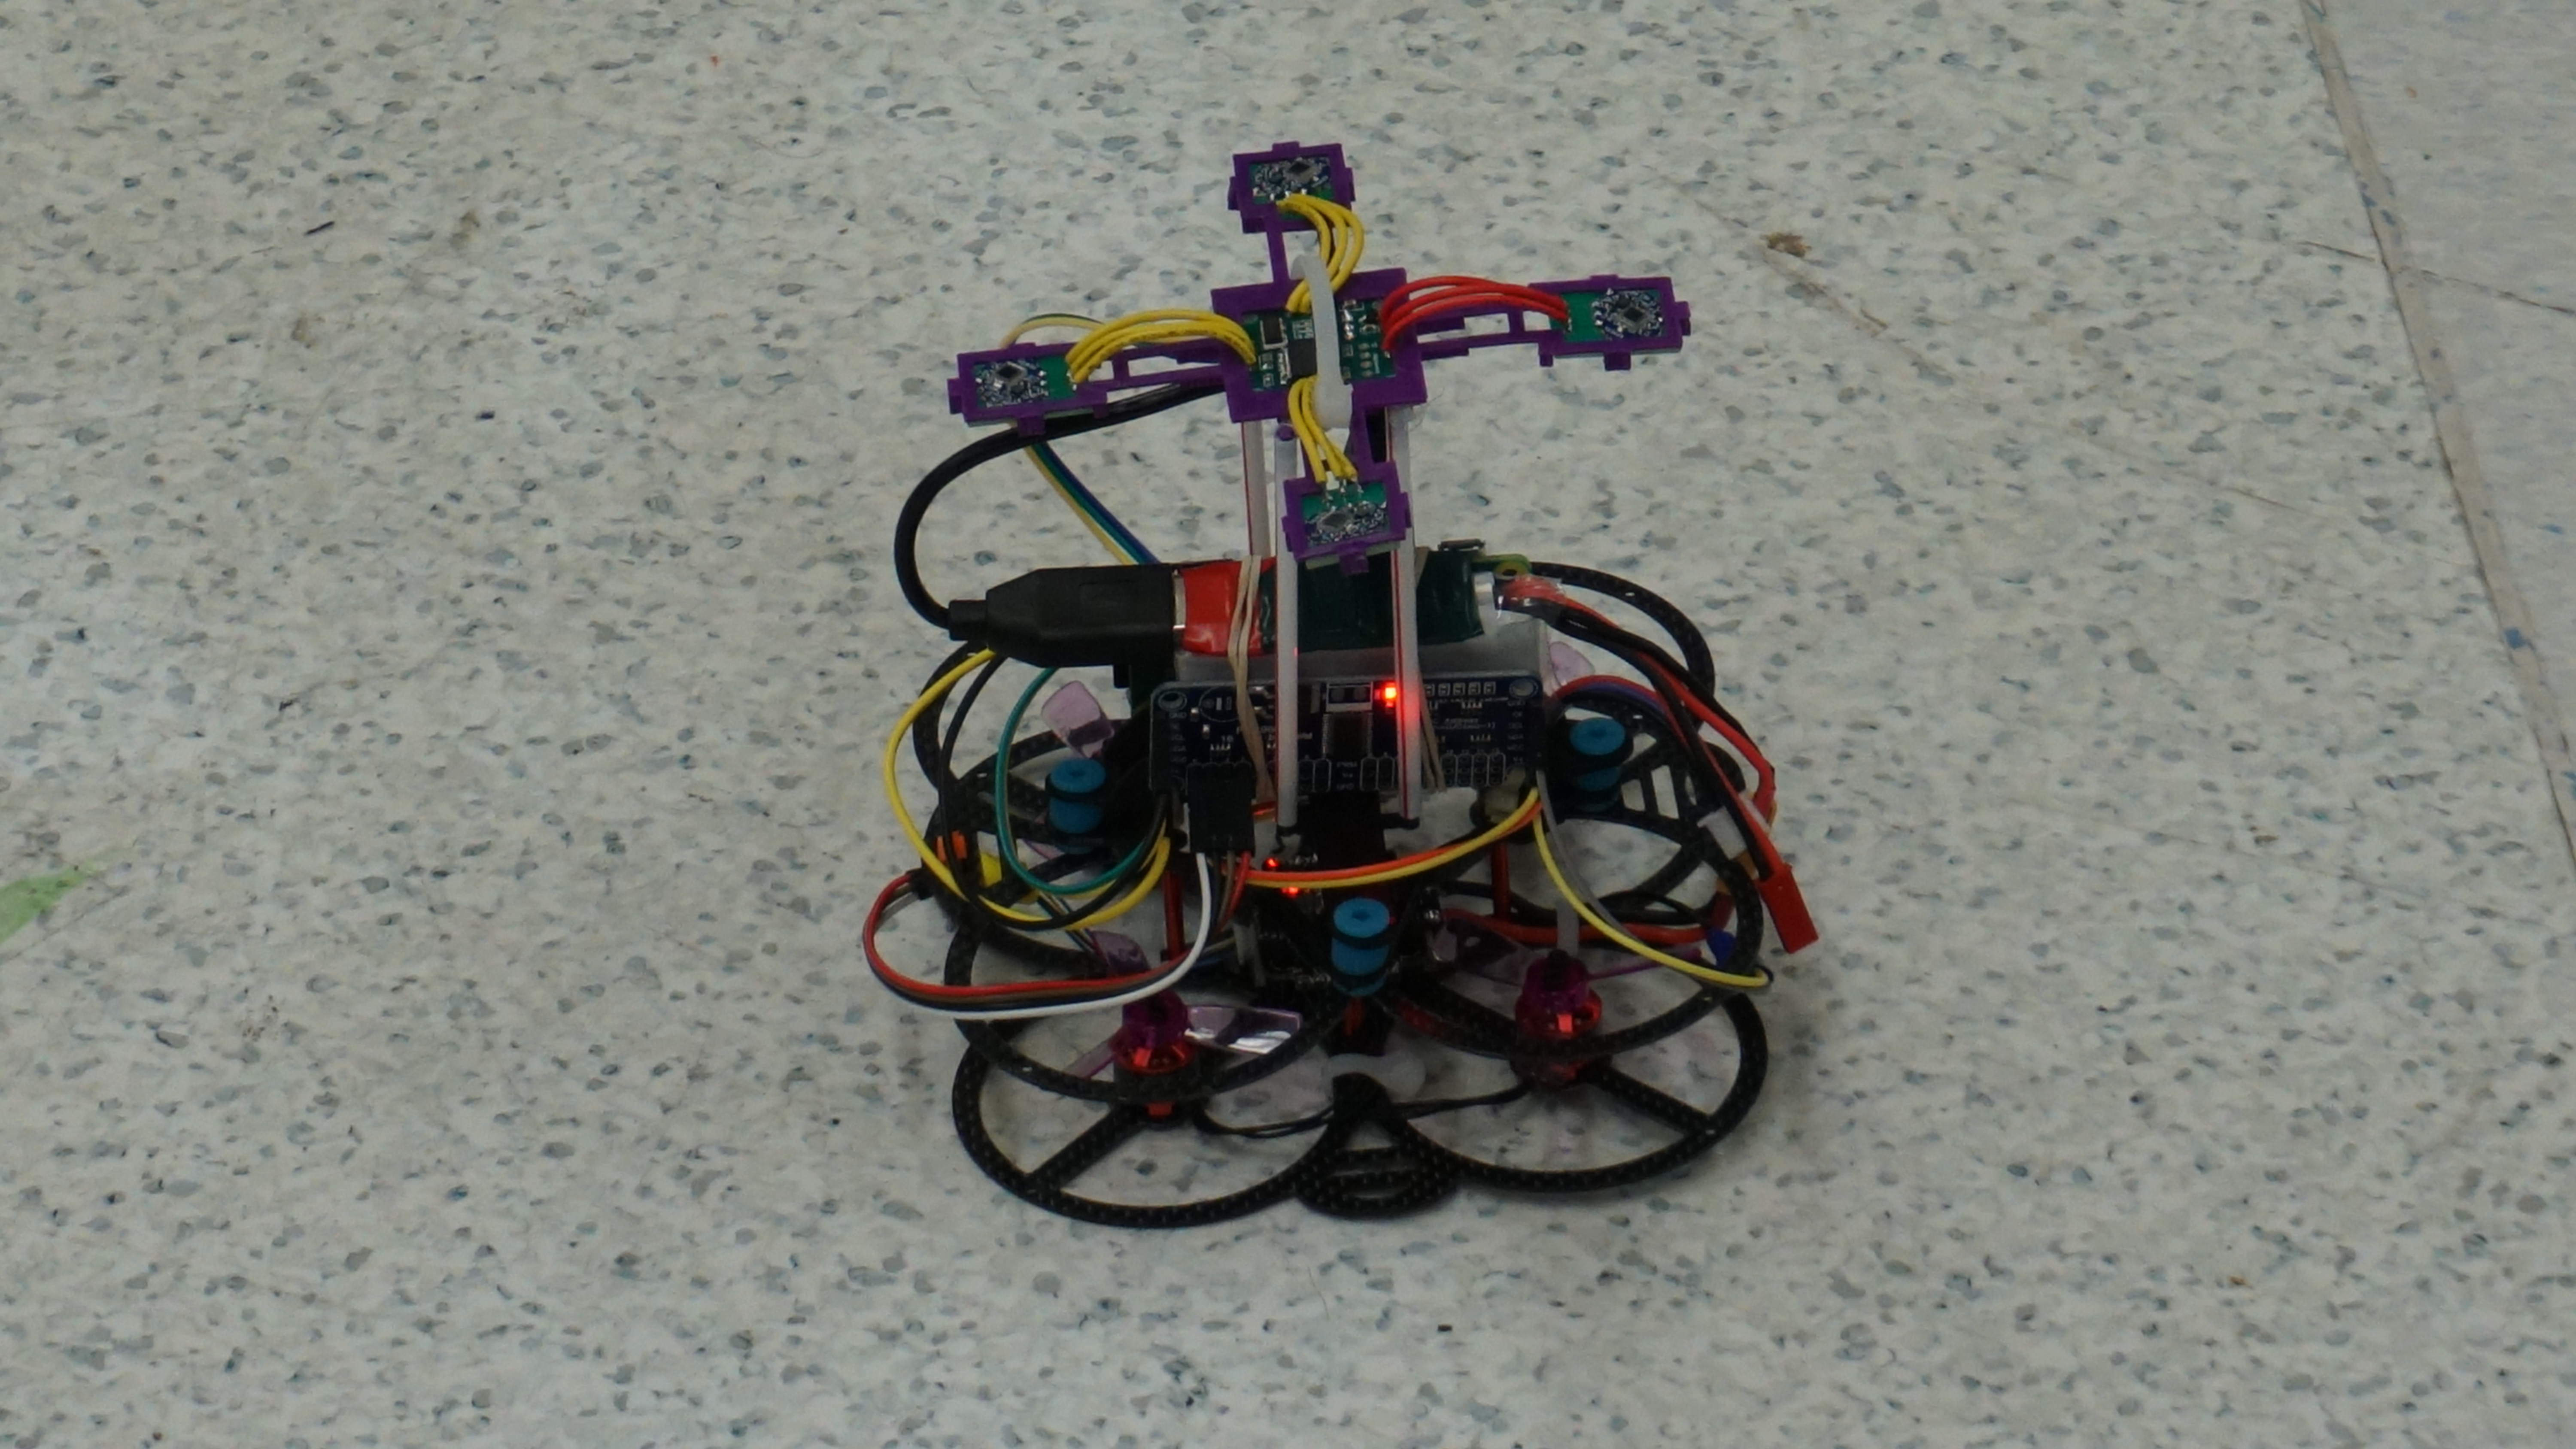 Finished quadcopter